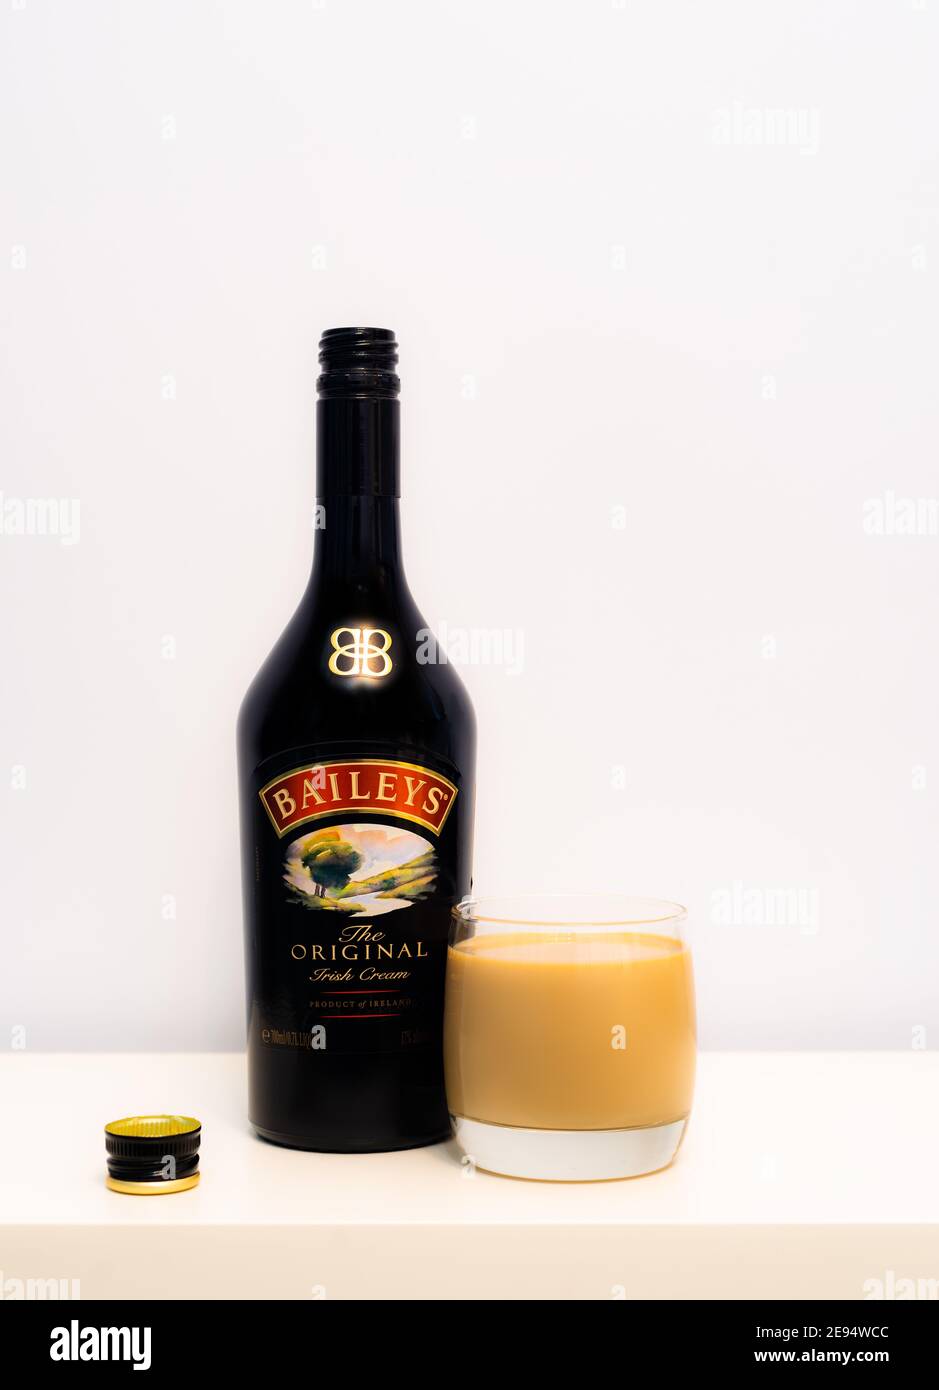 Baileys liquor open bottle with filled glass standing on the white Stock Photo